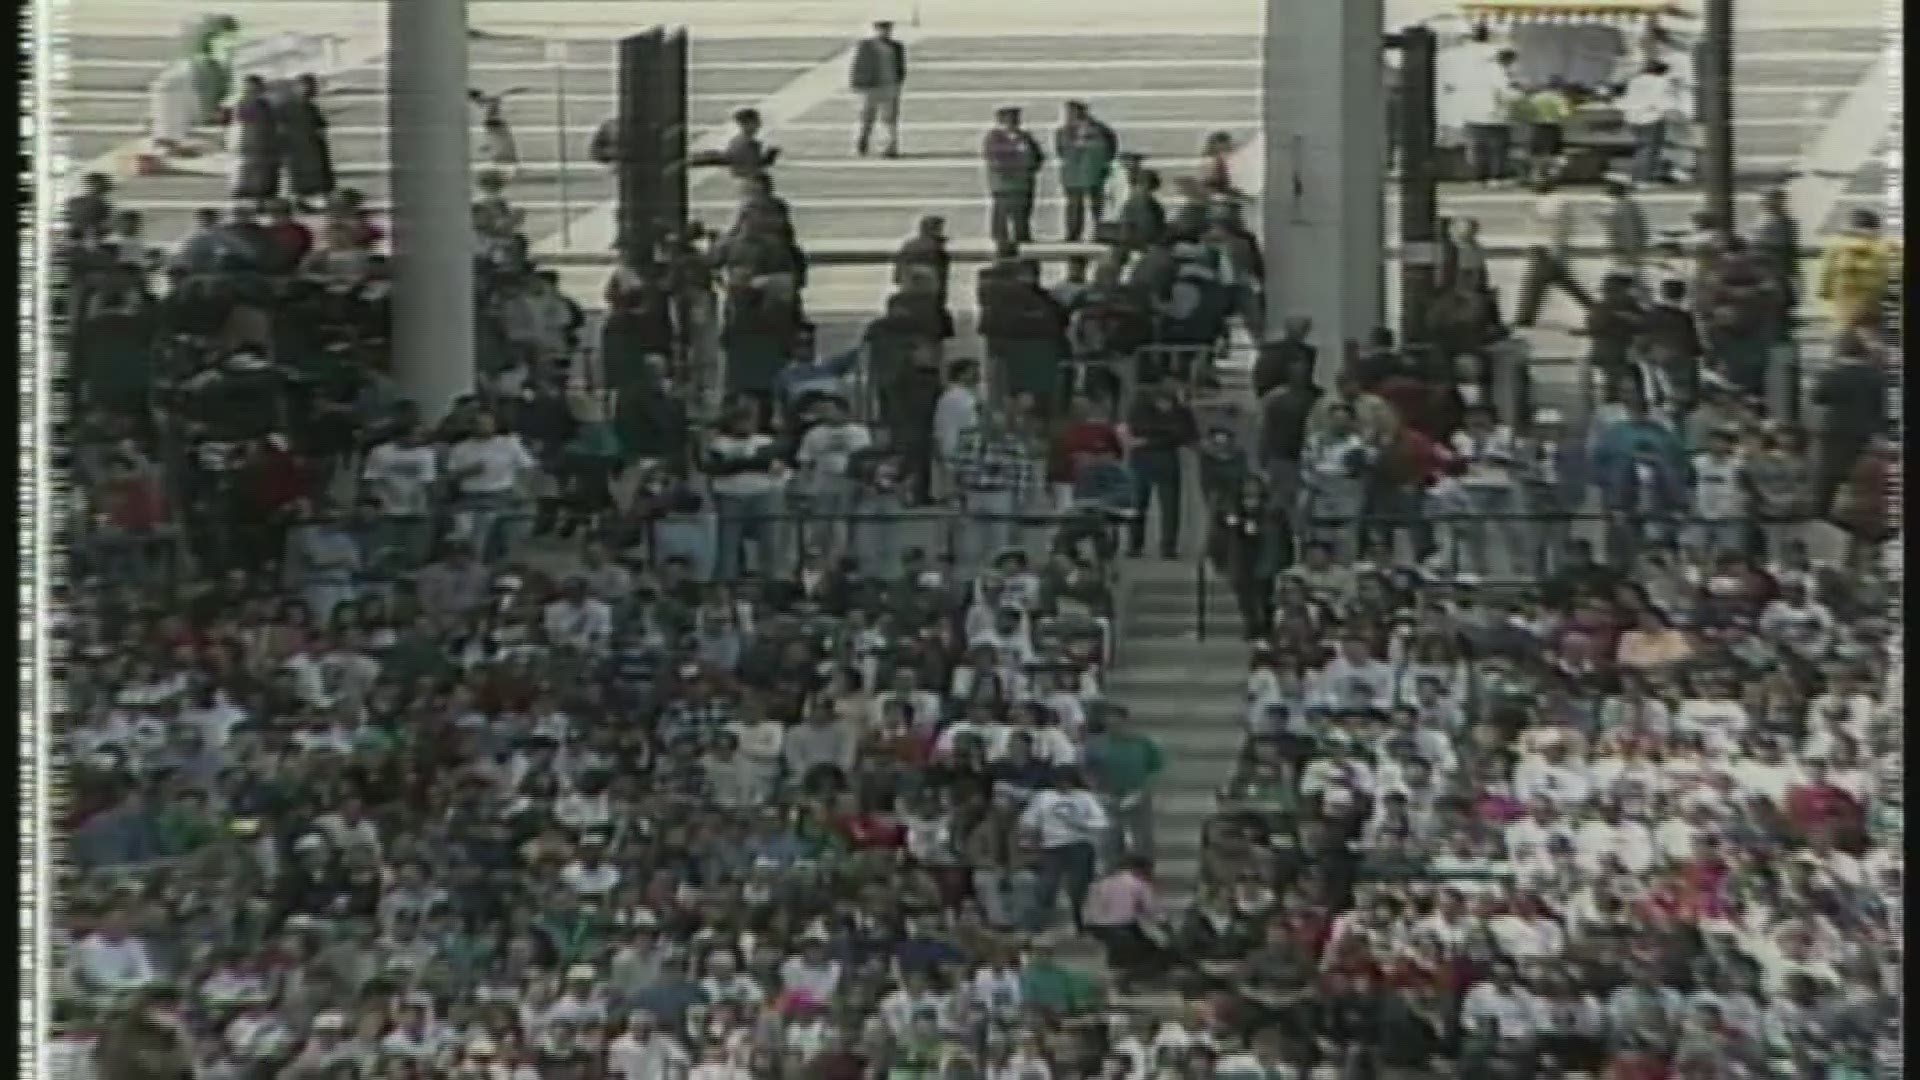 70 moments in WKYC history: Jacobs Field opens in 1994